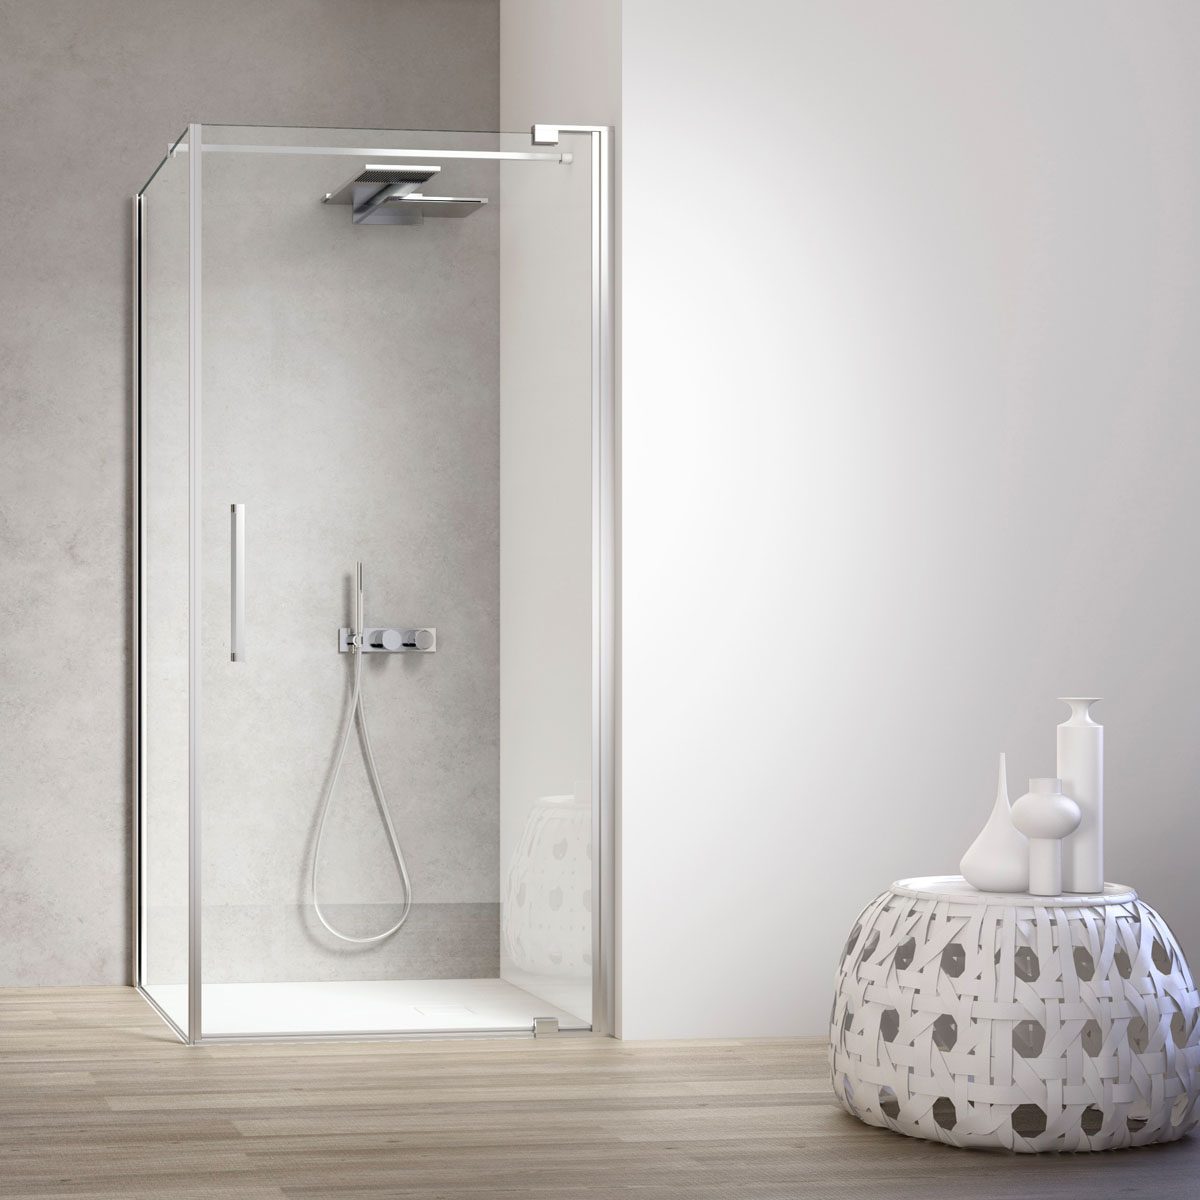 Functional shower enclosures for small bathrooms - Ideagroup Blog